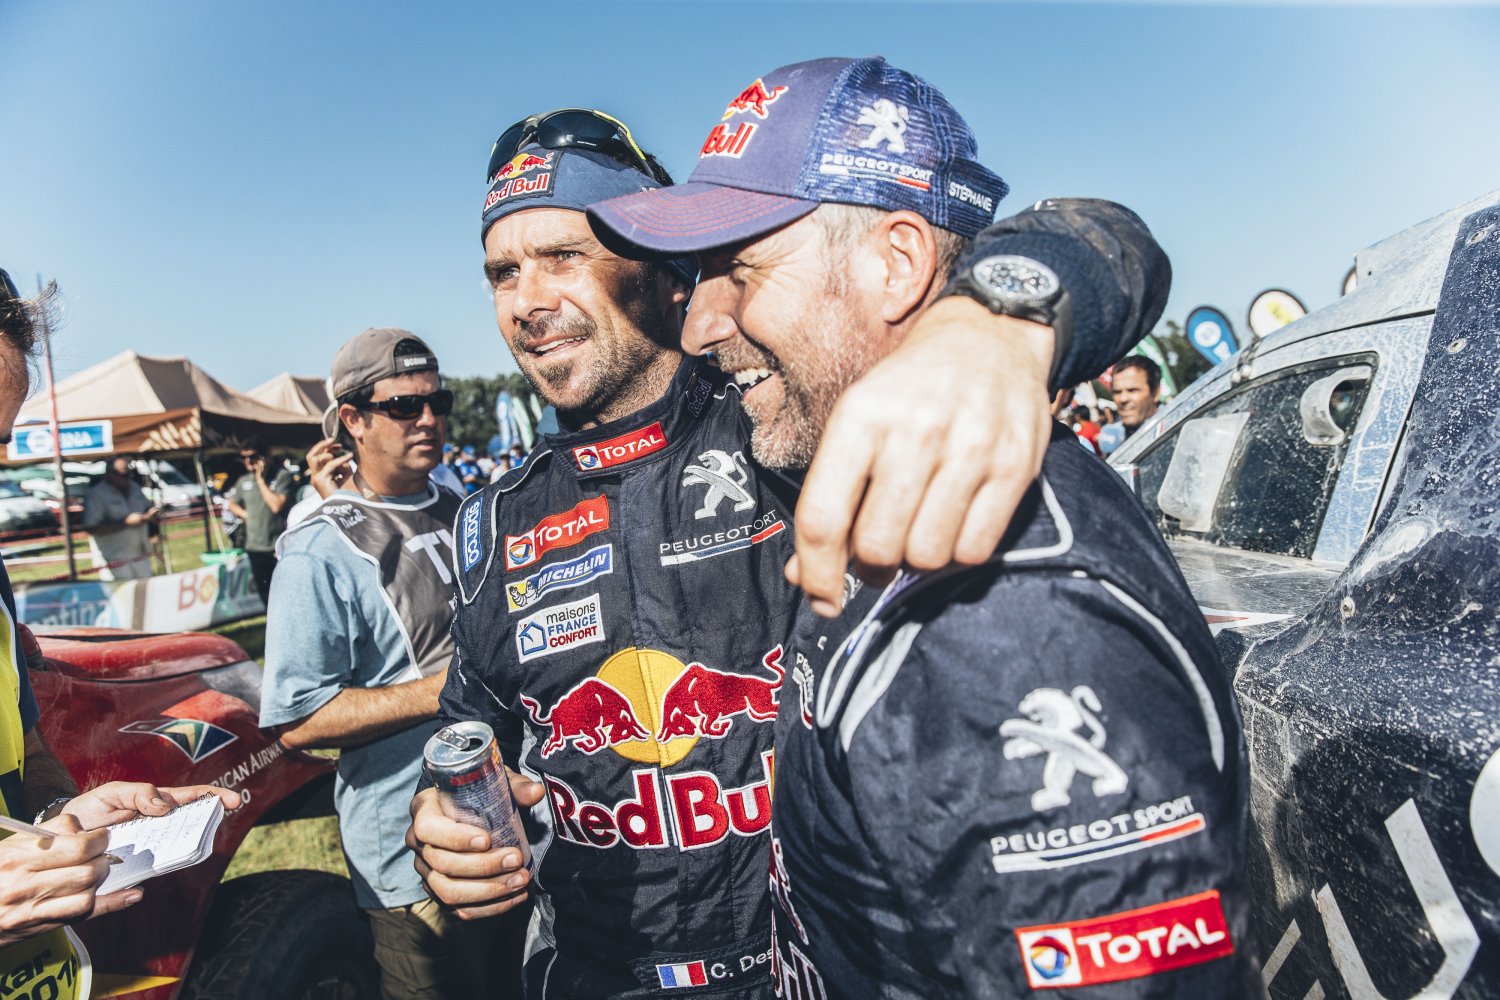 Peterhansel and his co-driver celebrate